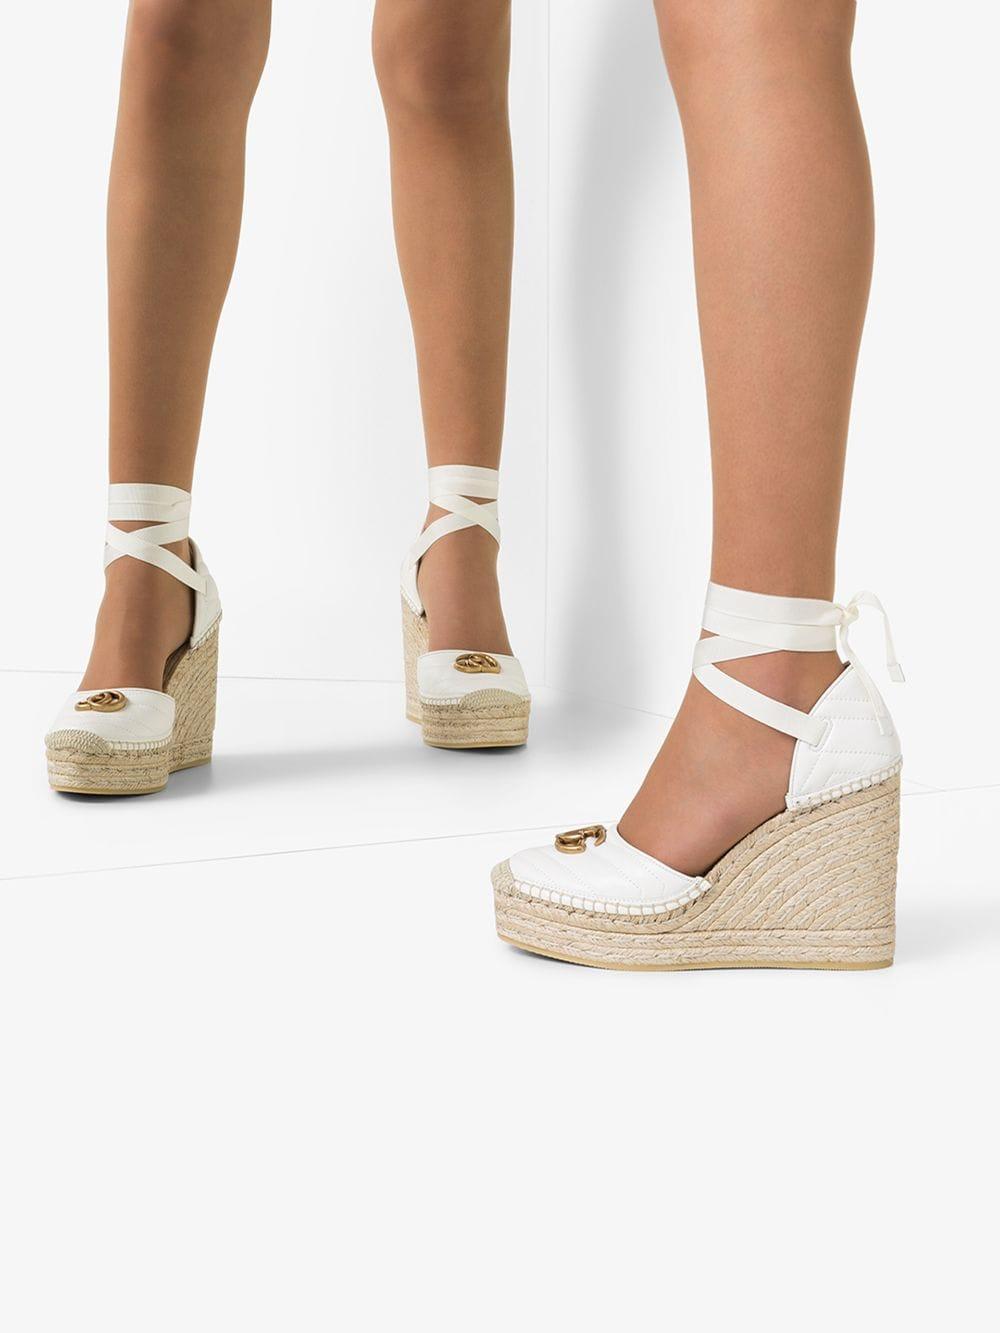 Gucci Pilar 120mm Quilted Leather Espadrilles in White | Lyst